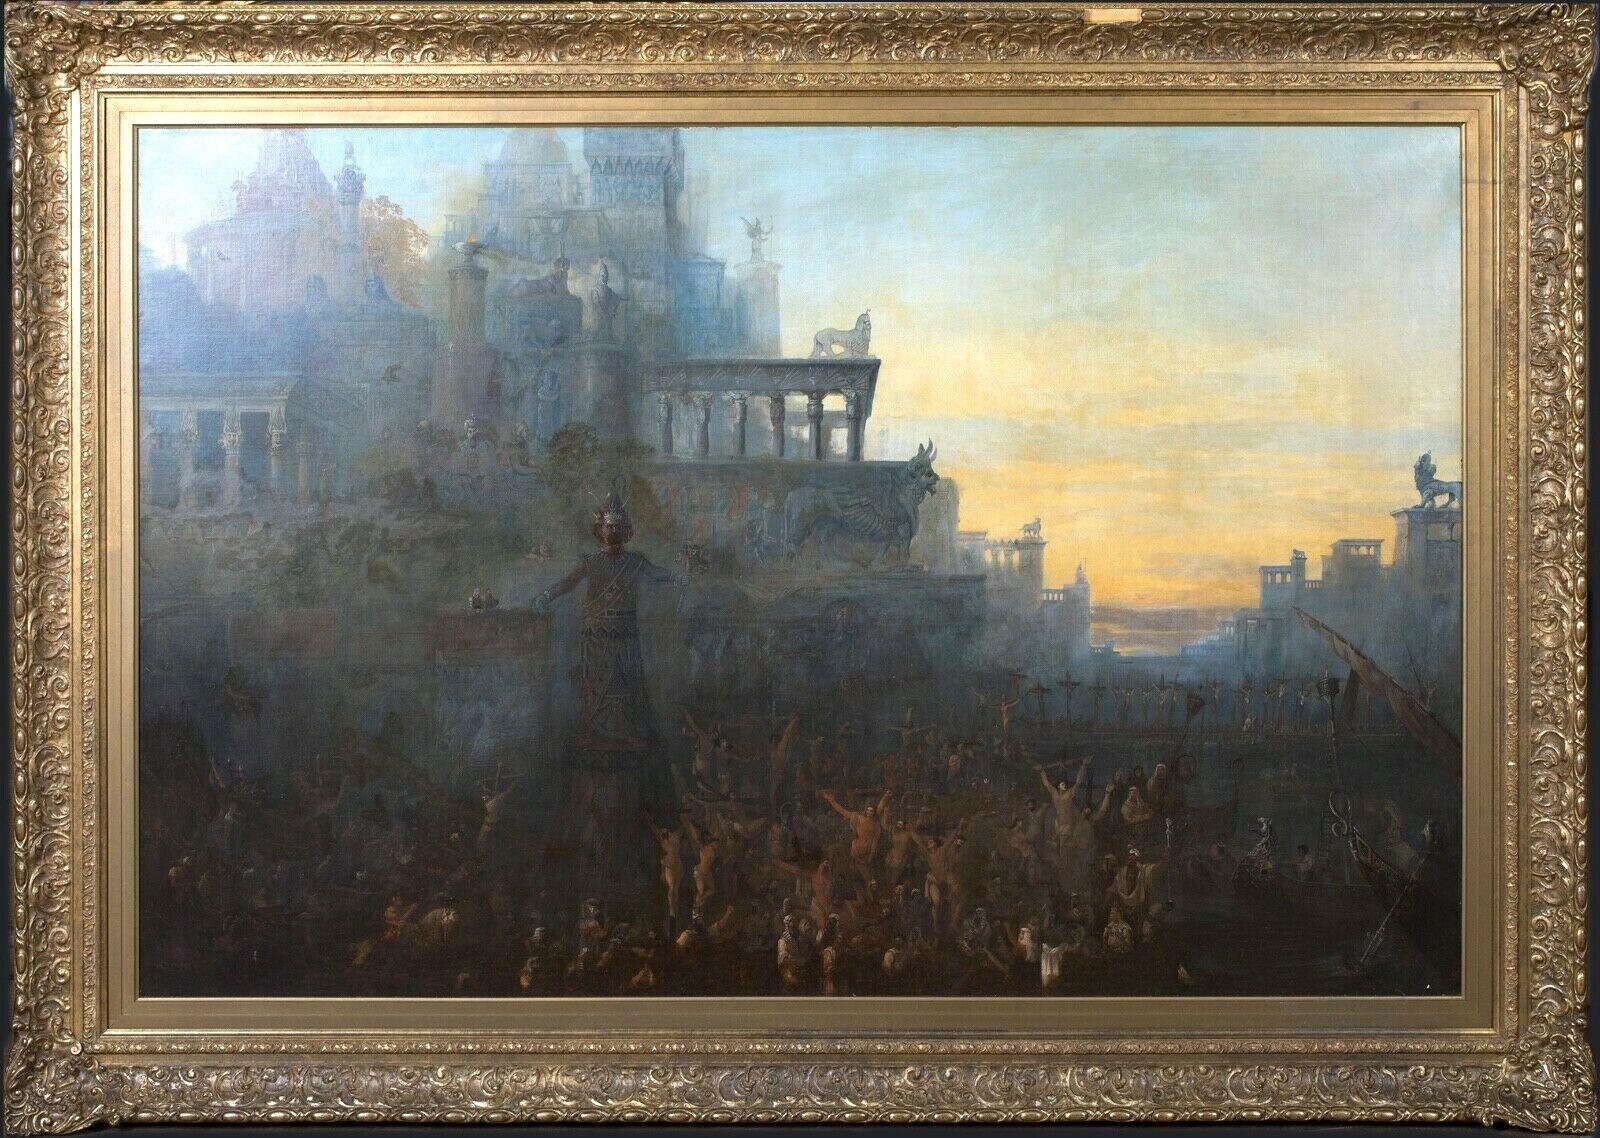 John Martin Landscape Painting - The Crucifixion Of The Tyrians by Alexander the Great, 332 BC, 19th Century